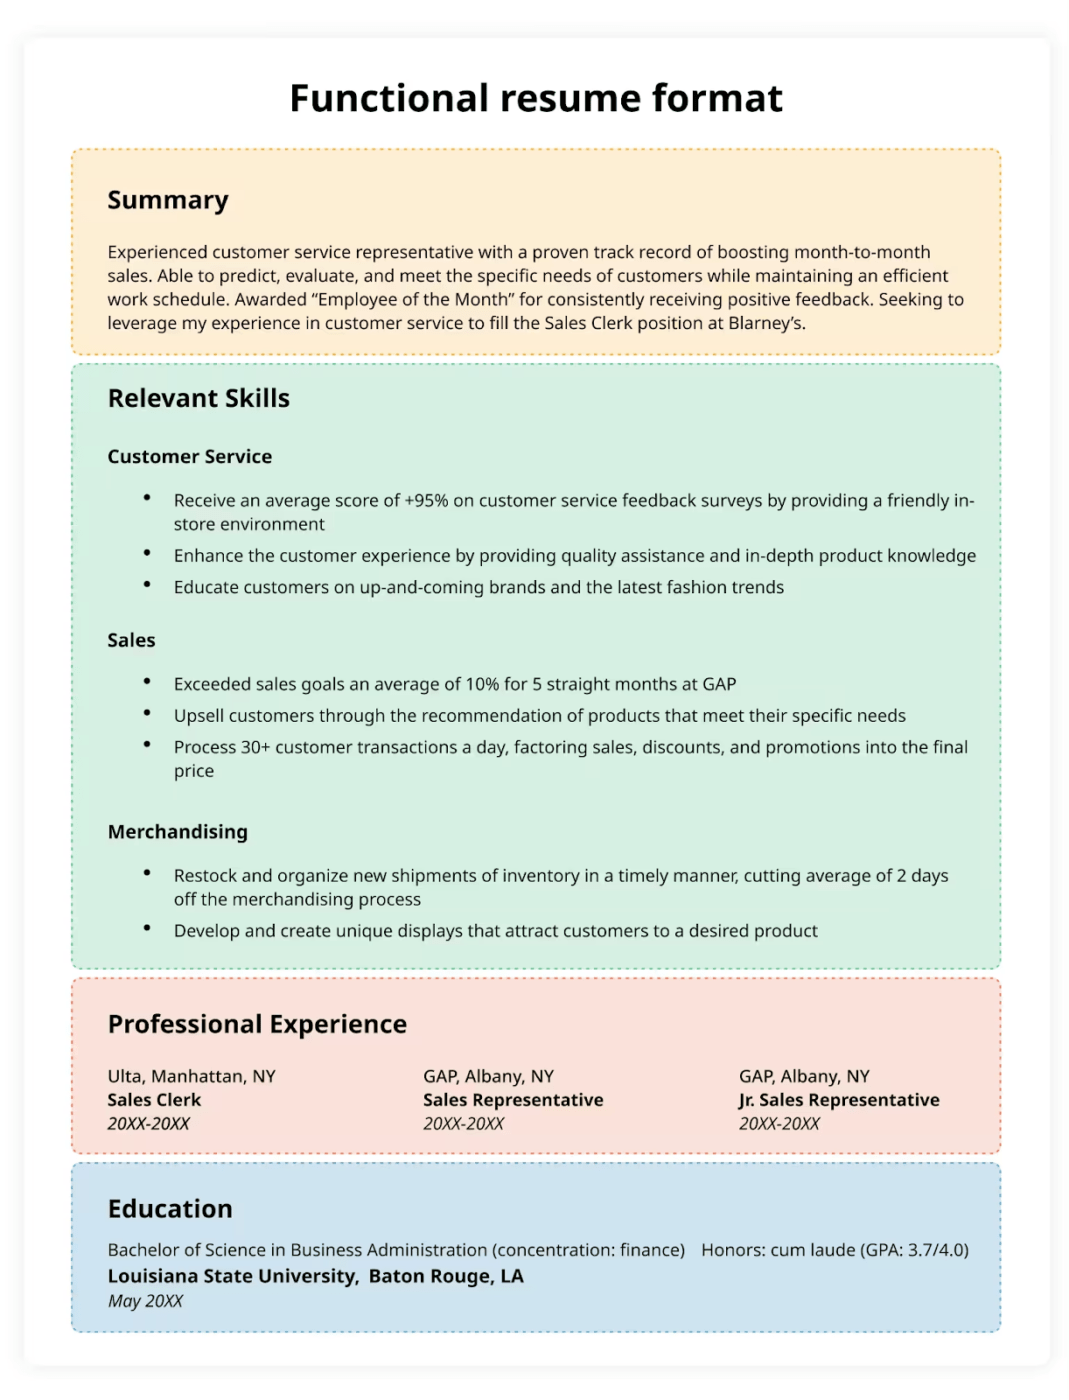 Functional resume format example